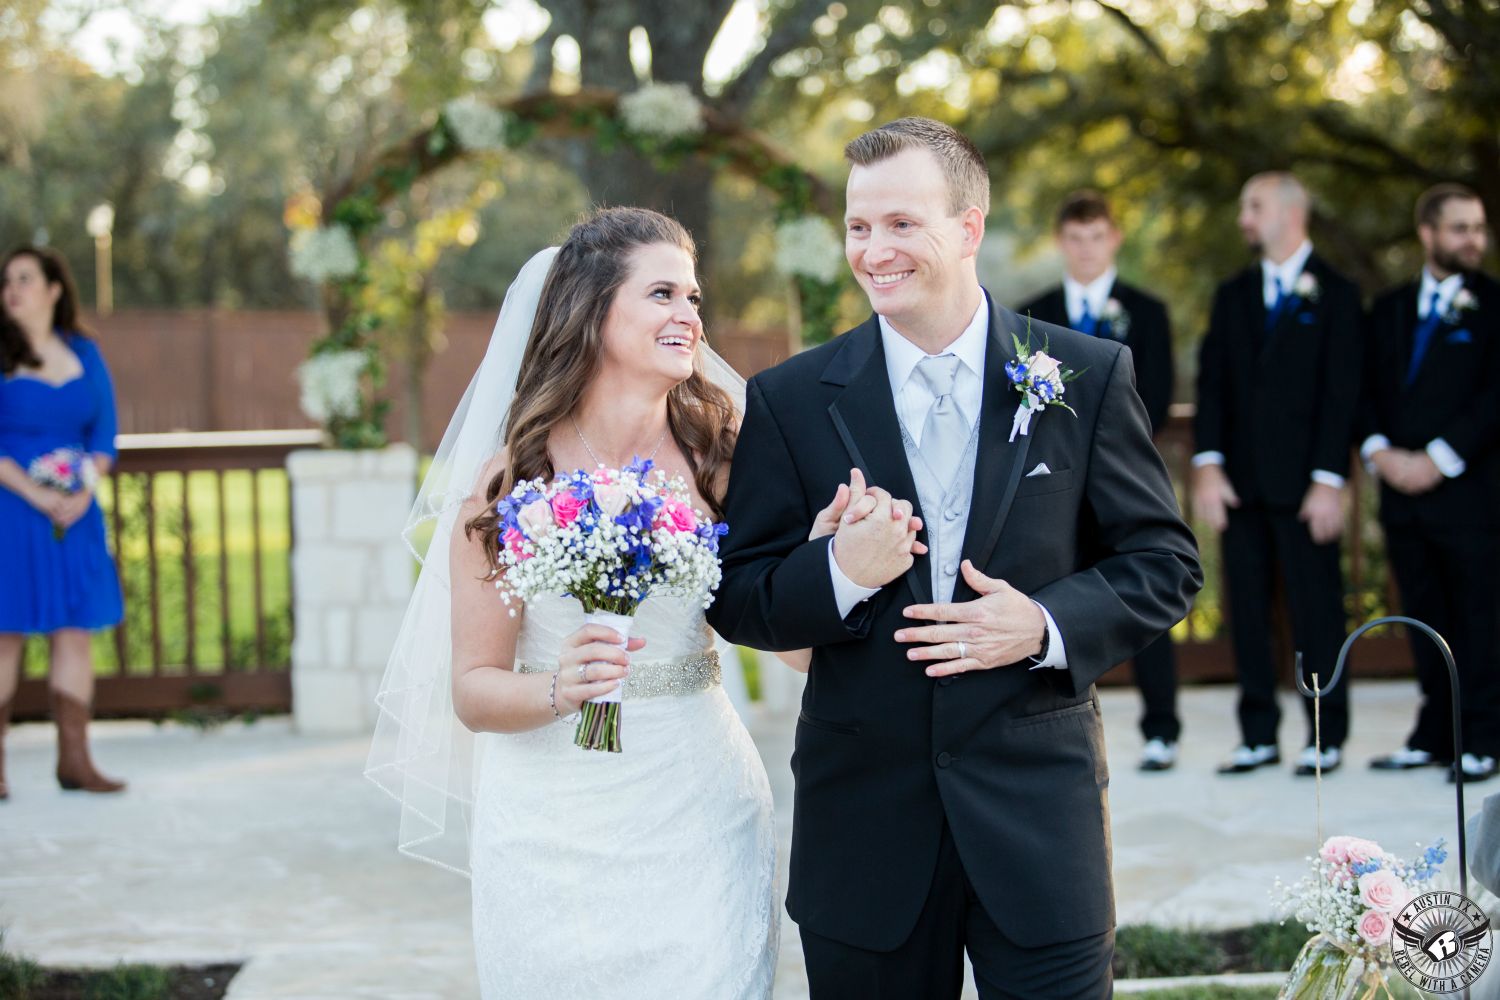 Happy brunette bride with pink and royal blue bouquet walks down the aisle after the wedding ceremony with her room in black tuxedo adn grey vest and tie as new husband and wife at Gabriel Springs Event CenterAaustin area wedding venue.